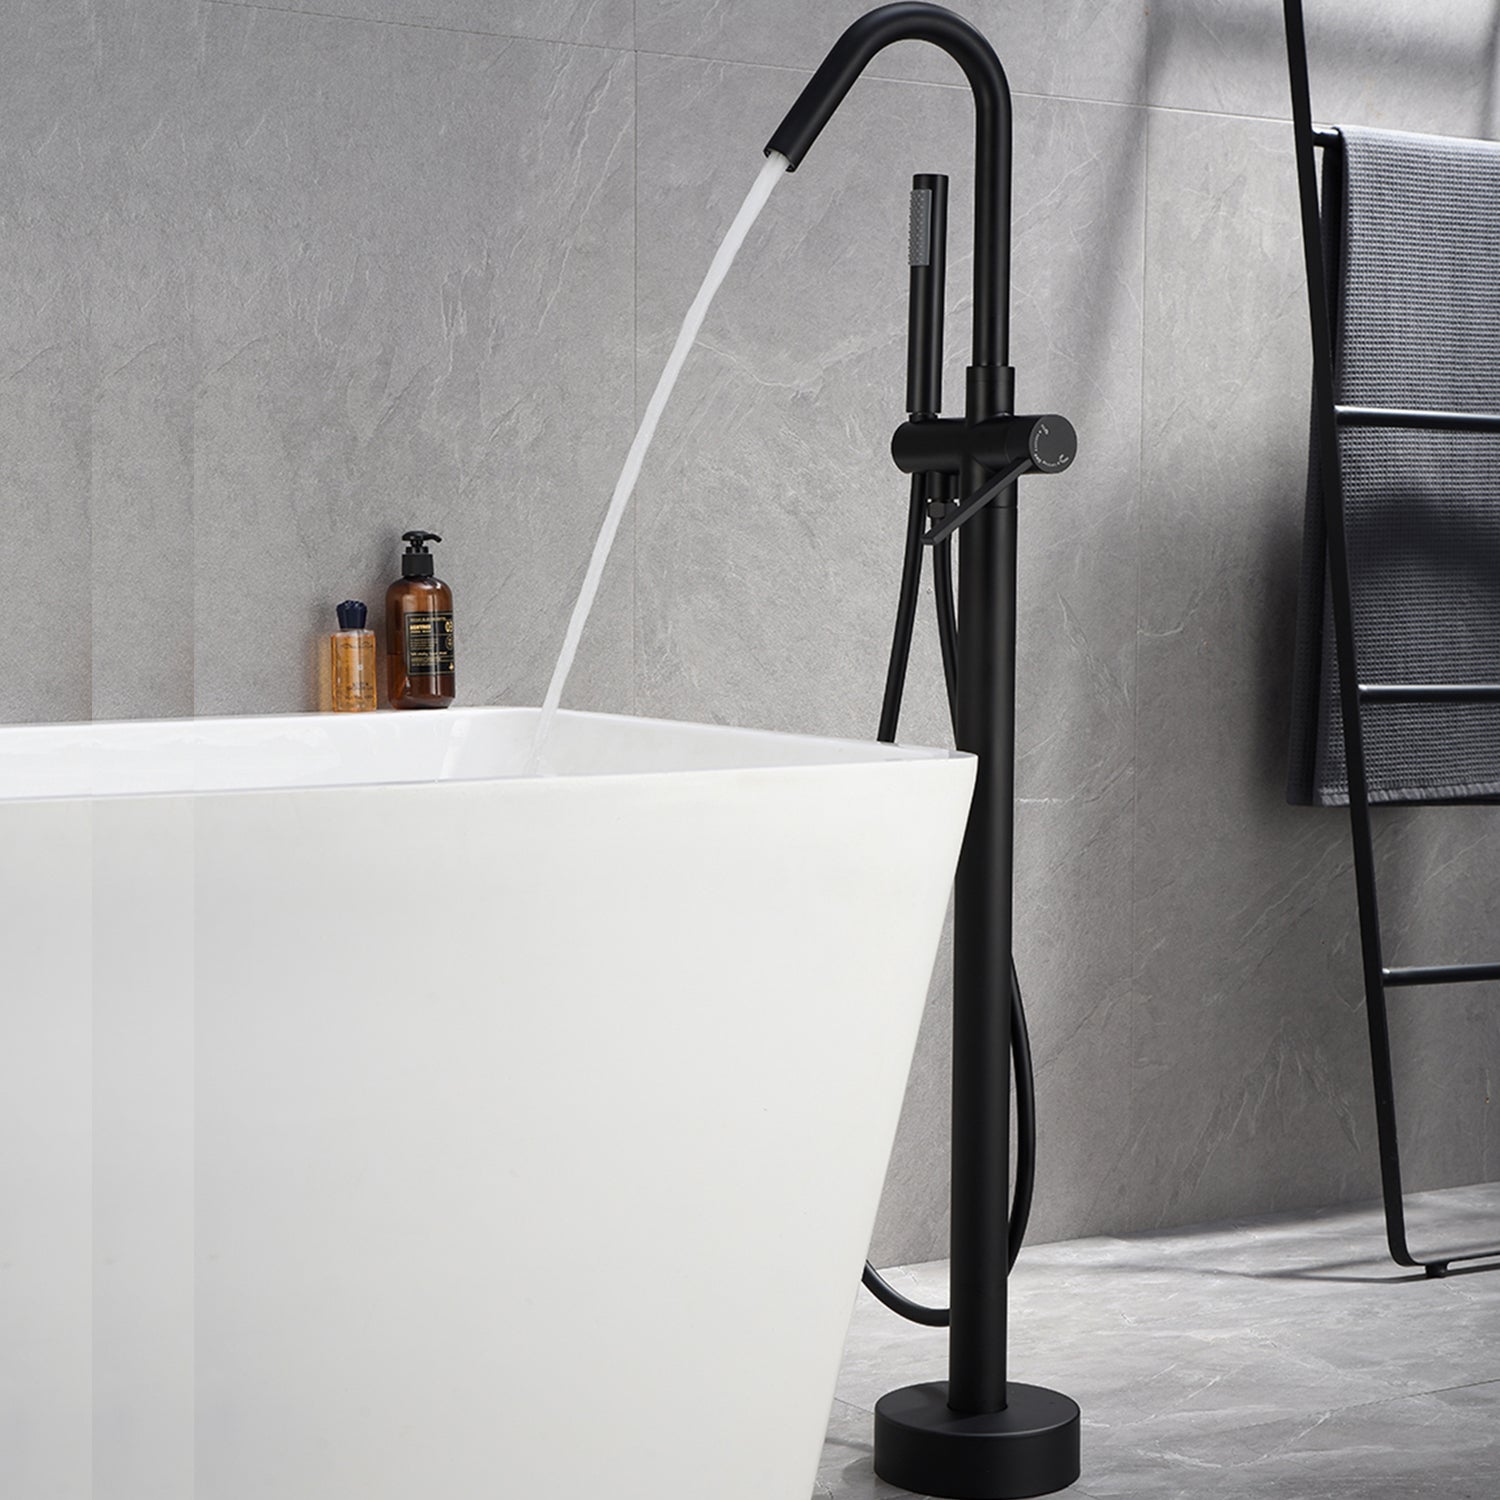 Floor Mounted Freestanding Bathtub Faucet With High-Arc Spout